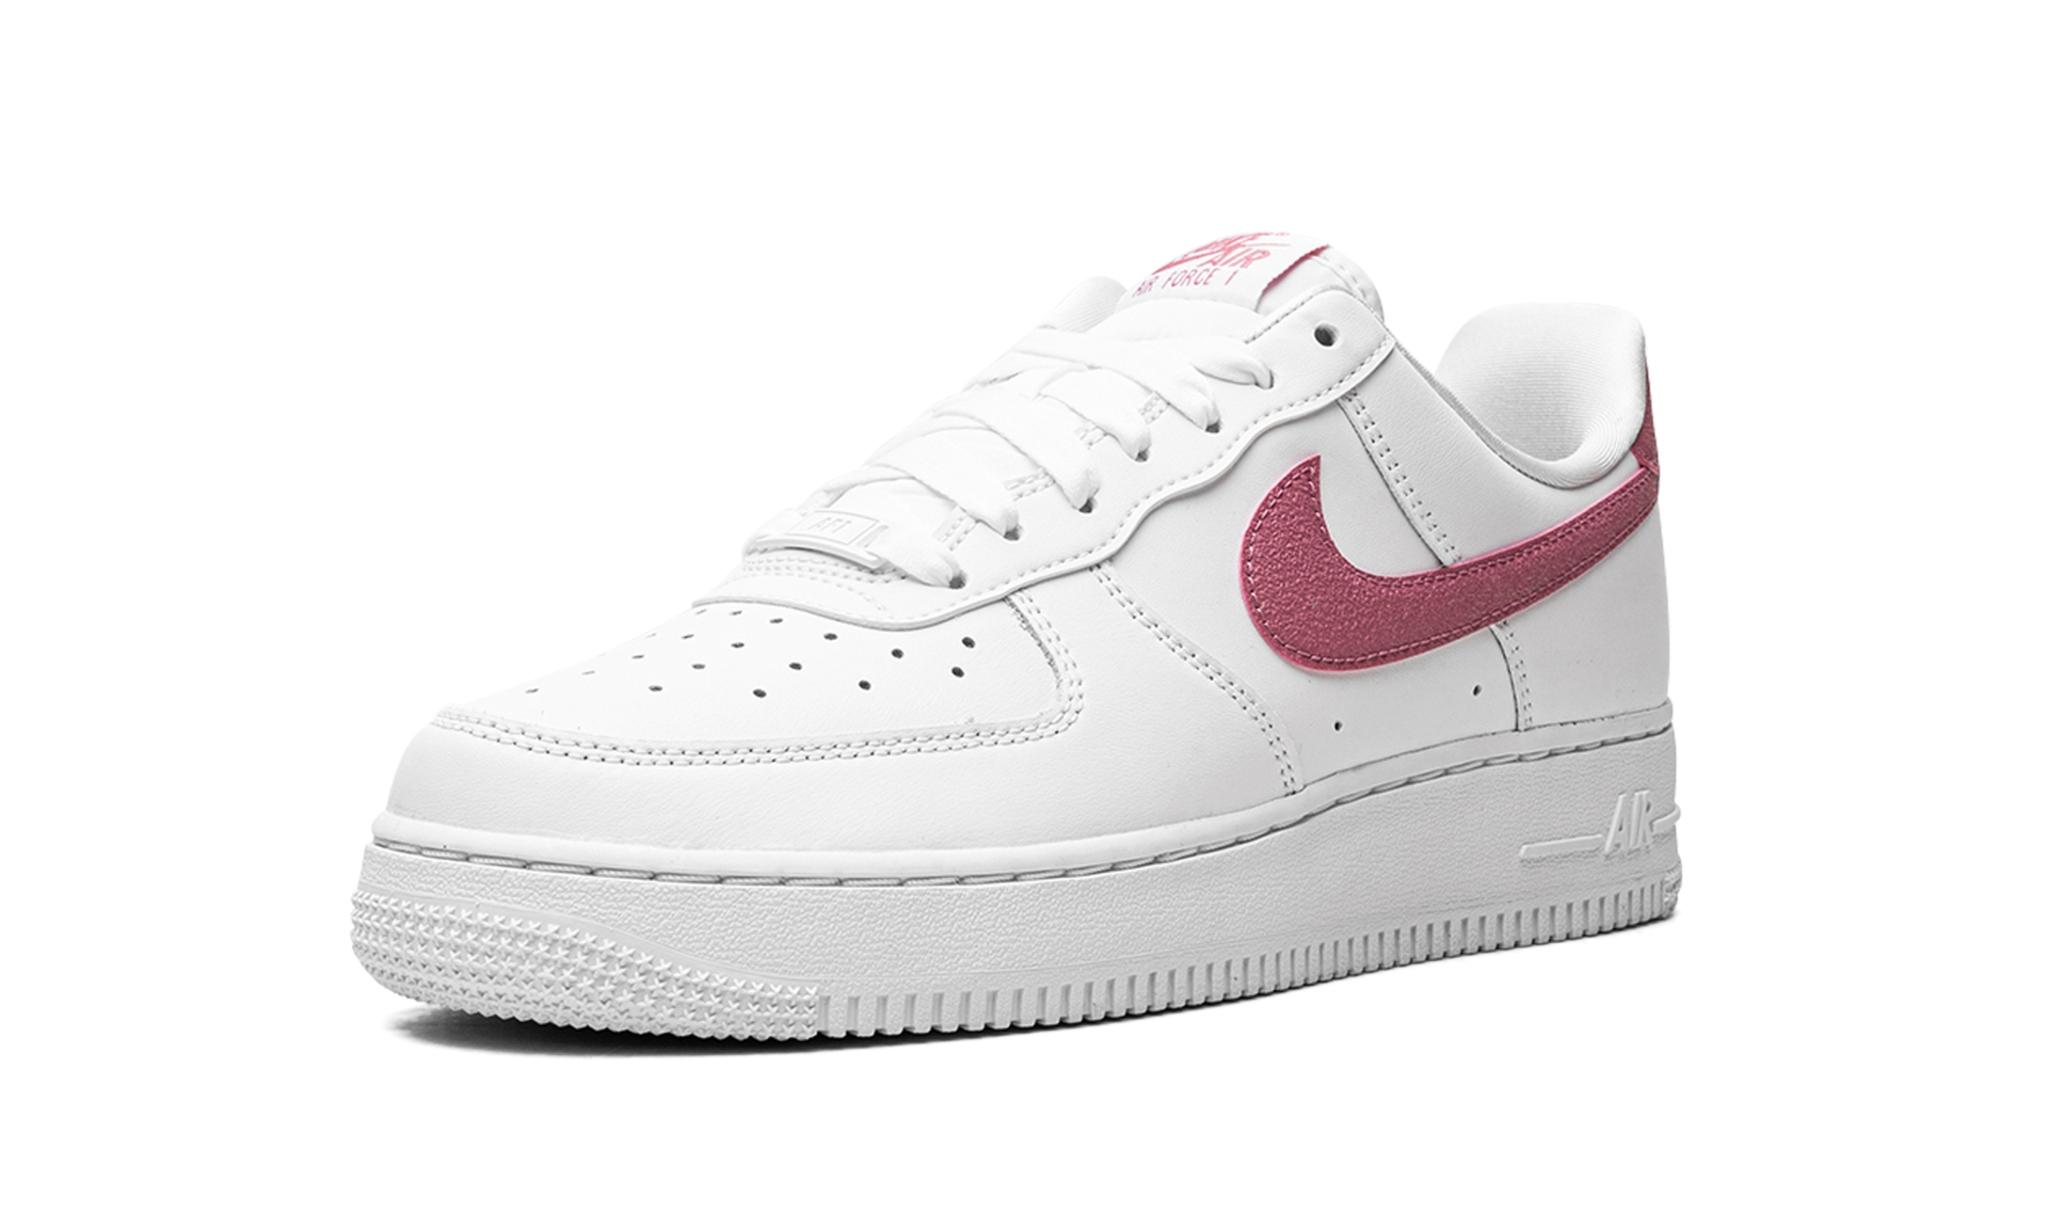 Nike Air Force 1 '07 Ess Trino "desert Berry" Shoes in Black | Lyst UK